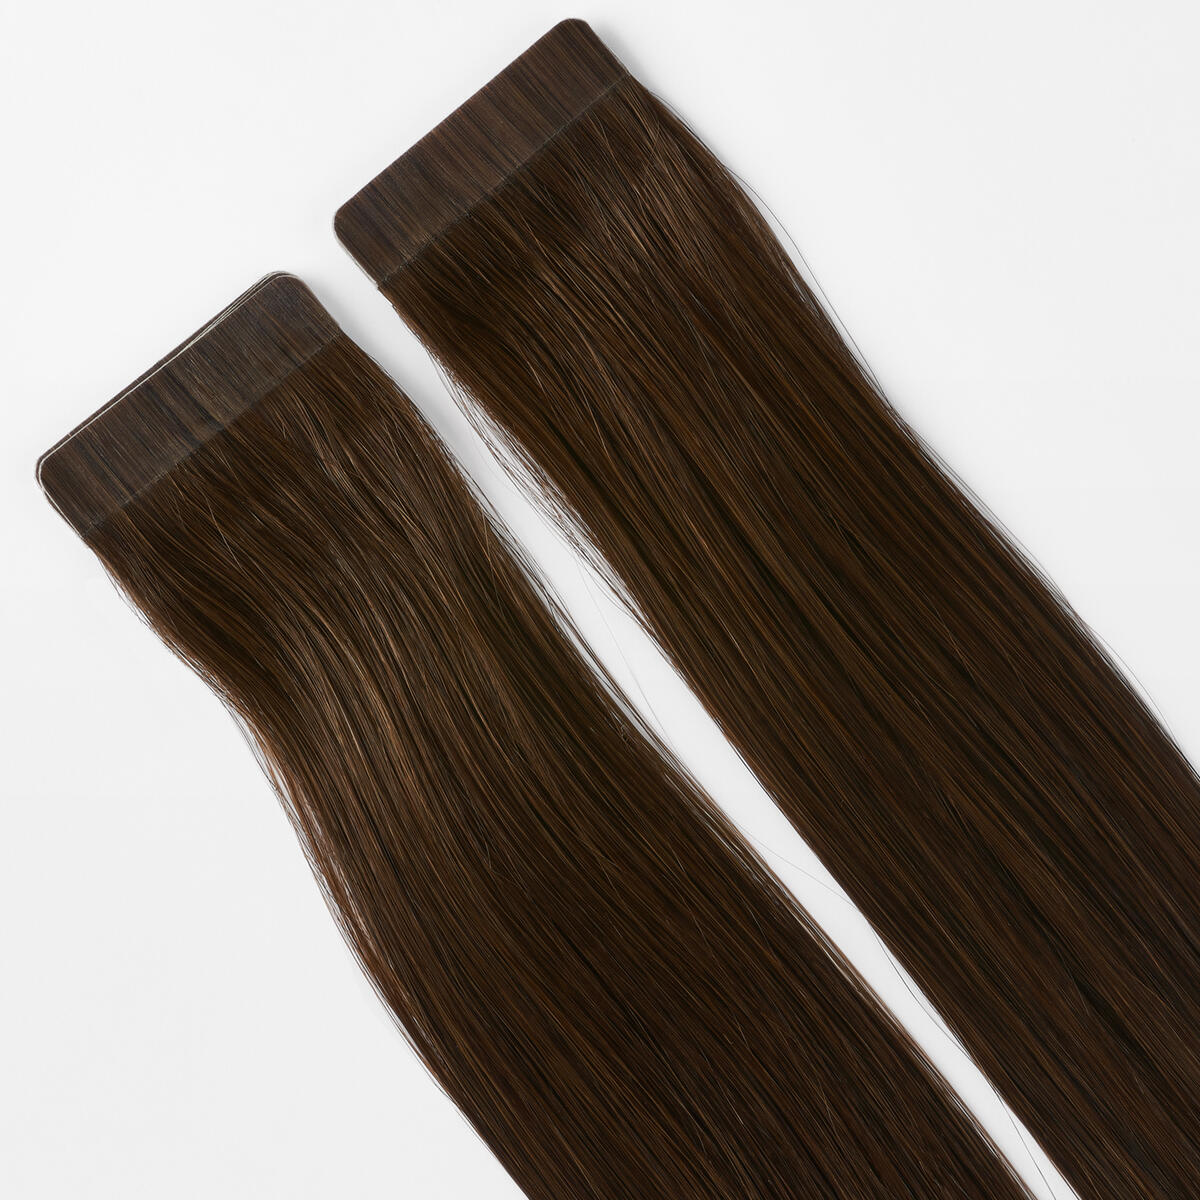 Basic Tape Extensions Classic 4 2.2 Coffee Brown 50 cm